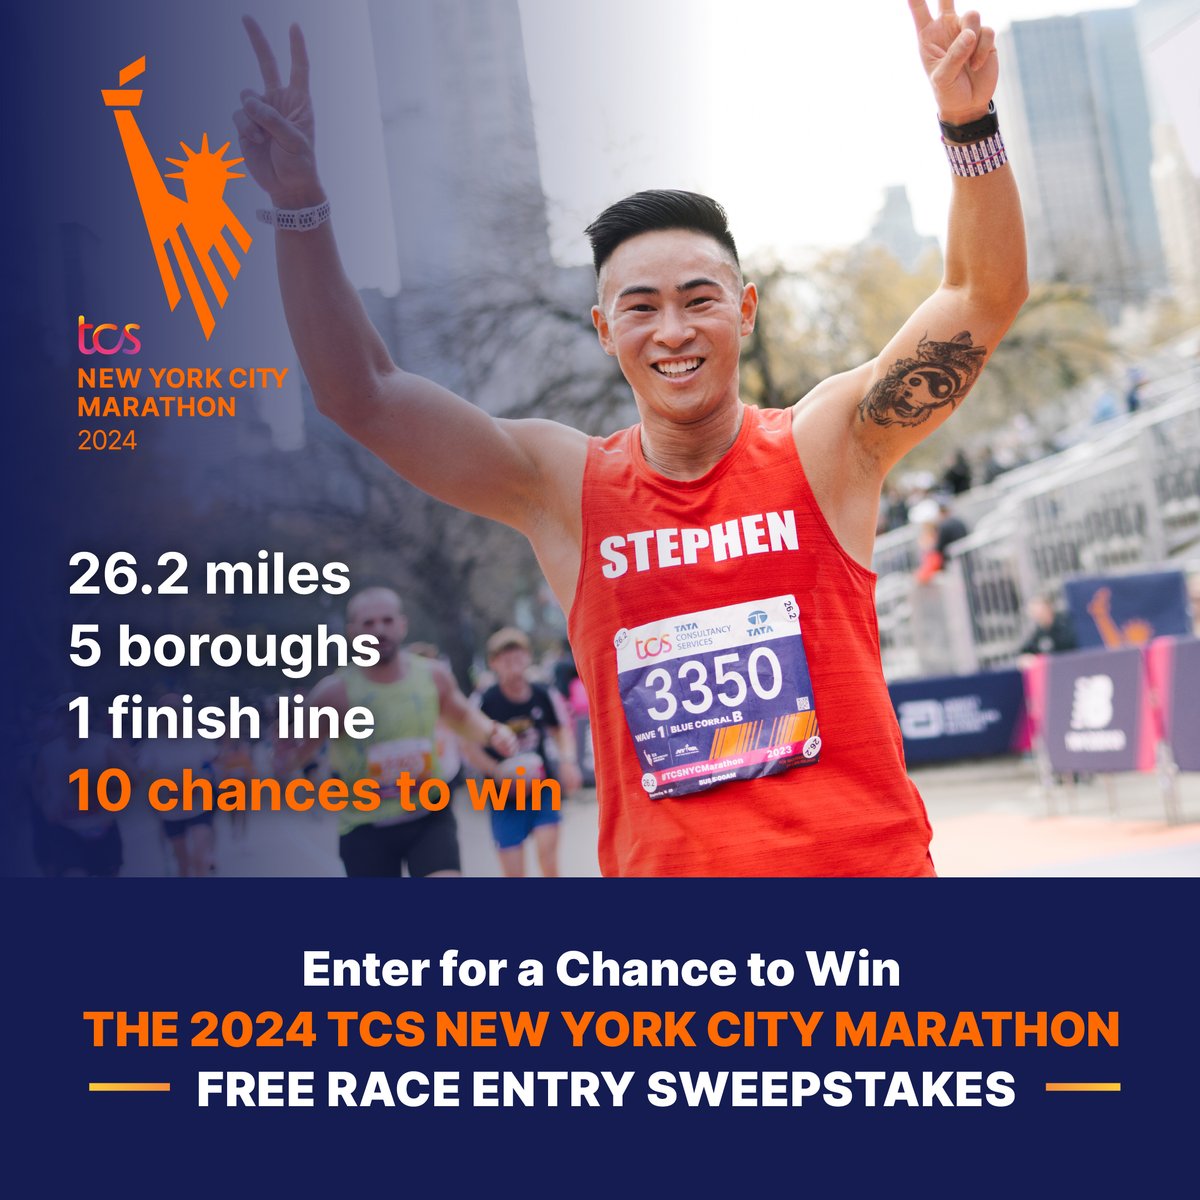 Enter the 2024 #TCSNYCMarathon Free Race Entry Sweepstakes for a chance to run the 2024 #TCSNYCMarathon!🎉 Ten lucky winners will each receive complimentary, guaranteed entry to run on November 3, 2024. Learn more and enter today: bit.ly/3xiyaZm